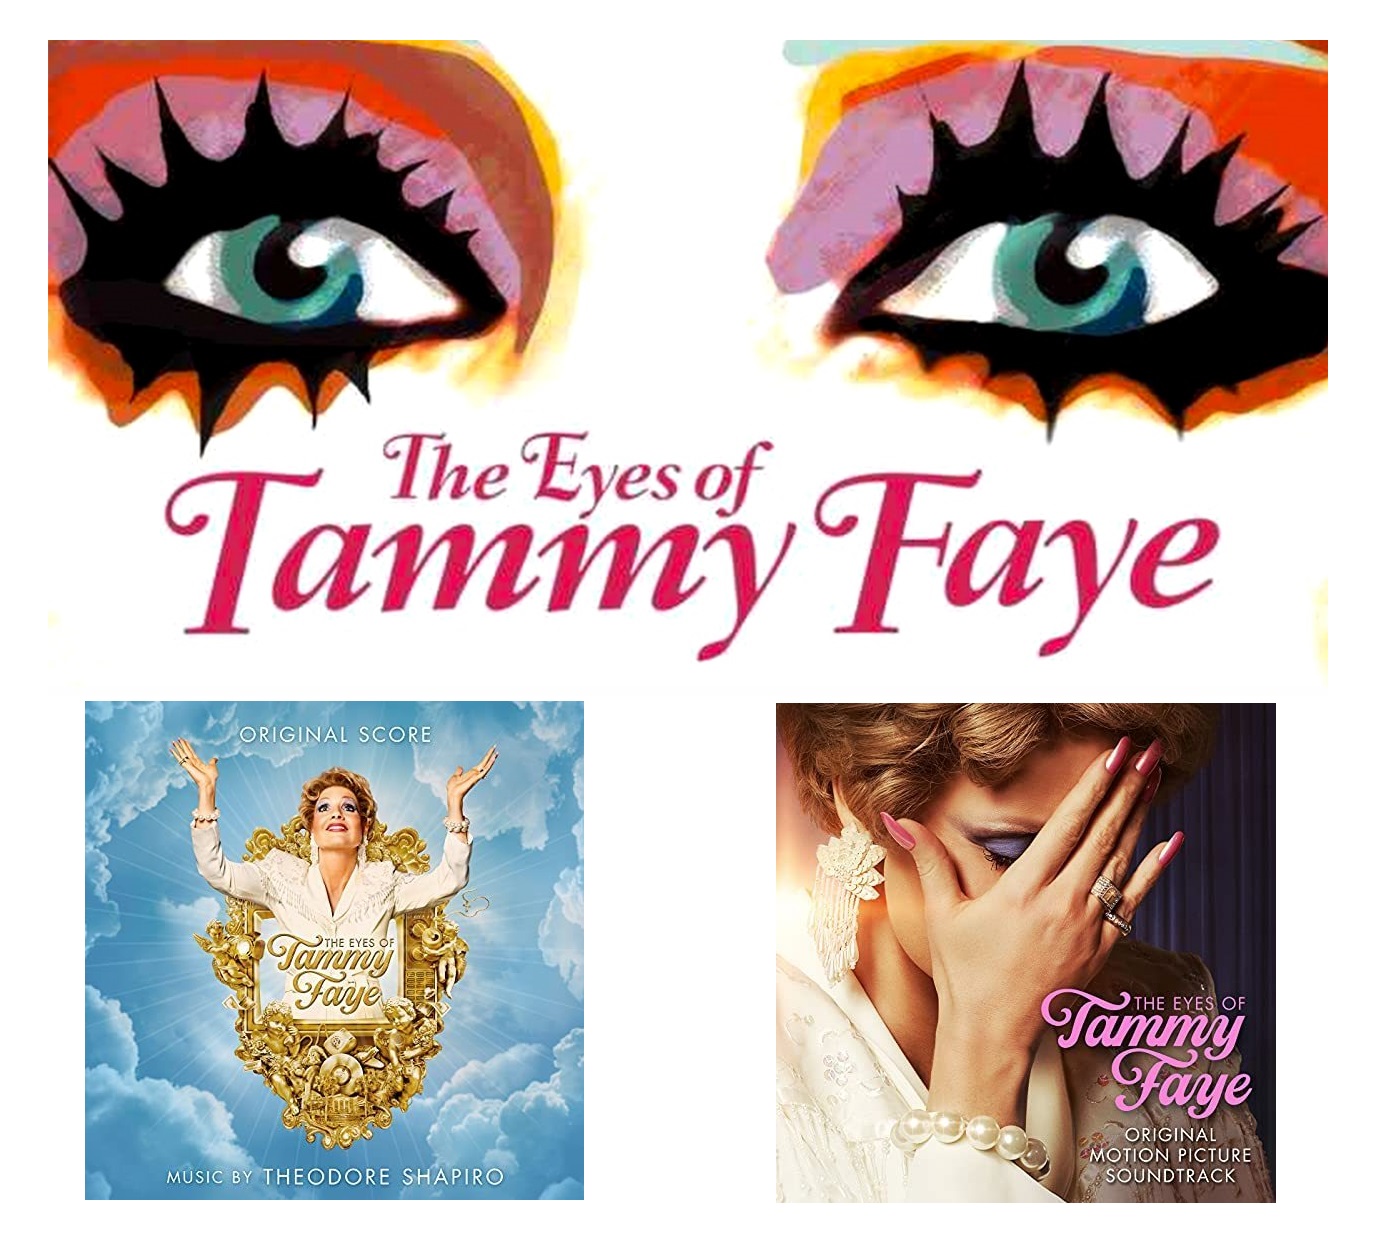 The Eyes of Tammy Faye (Songs and Score)